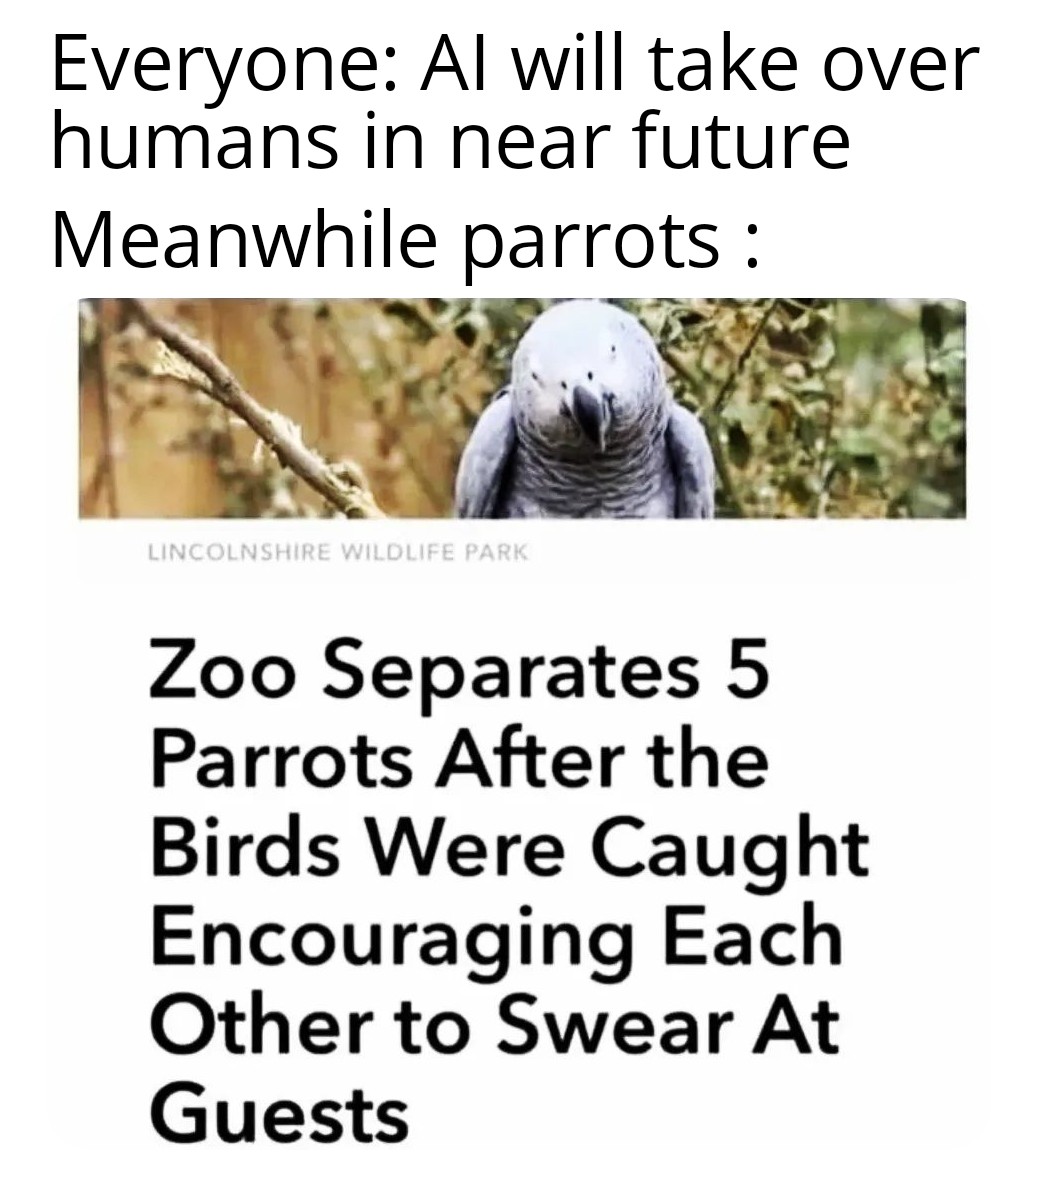 monday morning randomness - man teaches parrots to swear meme - Everyone humans in near future Meanwhile parrots Al will take over Lincolnshire Wildlife Park Zoo Separates 5 Parrots After the Birds Were Caught Encouraging Each Other to Swear At Guests